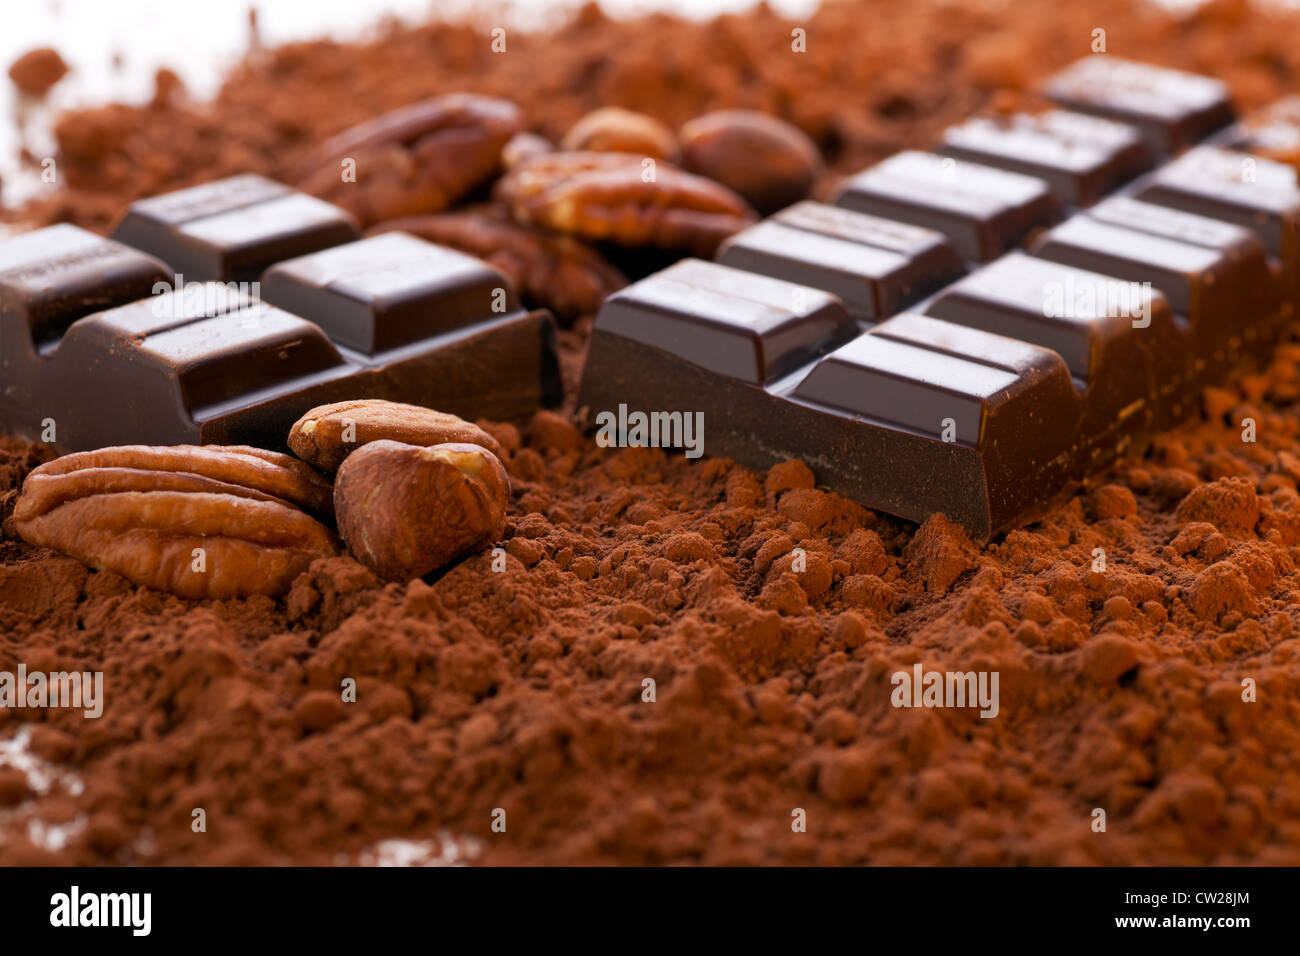 Chocolate bar broken in half with cocoa powder and nuts. Stock Photo